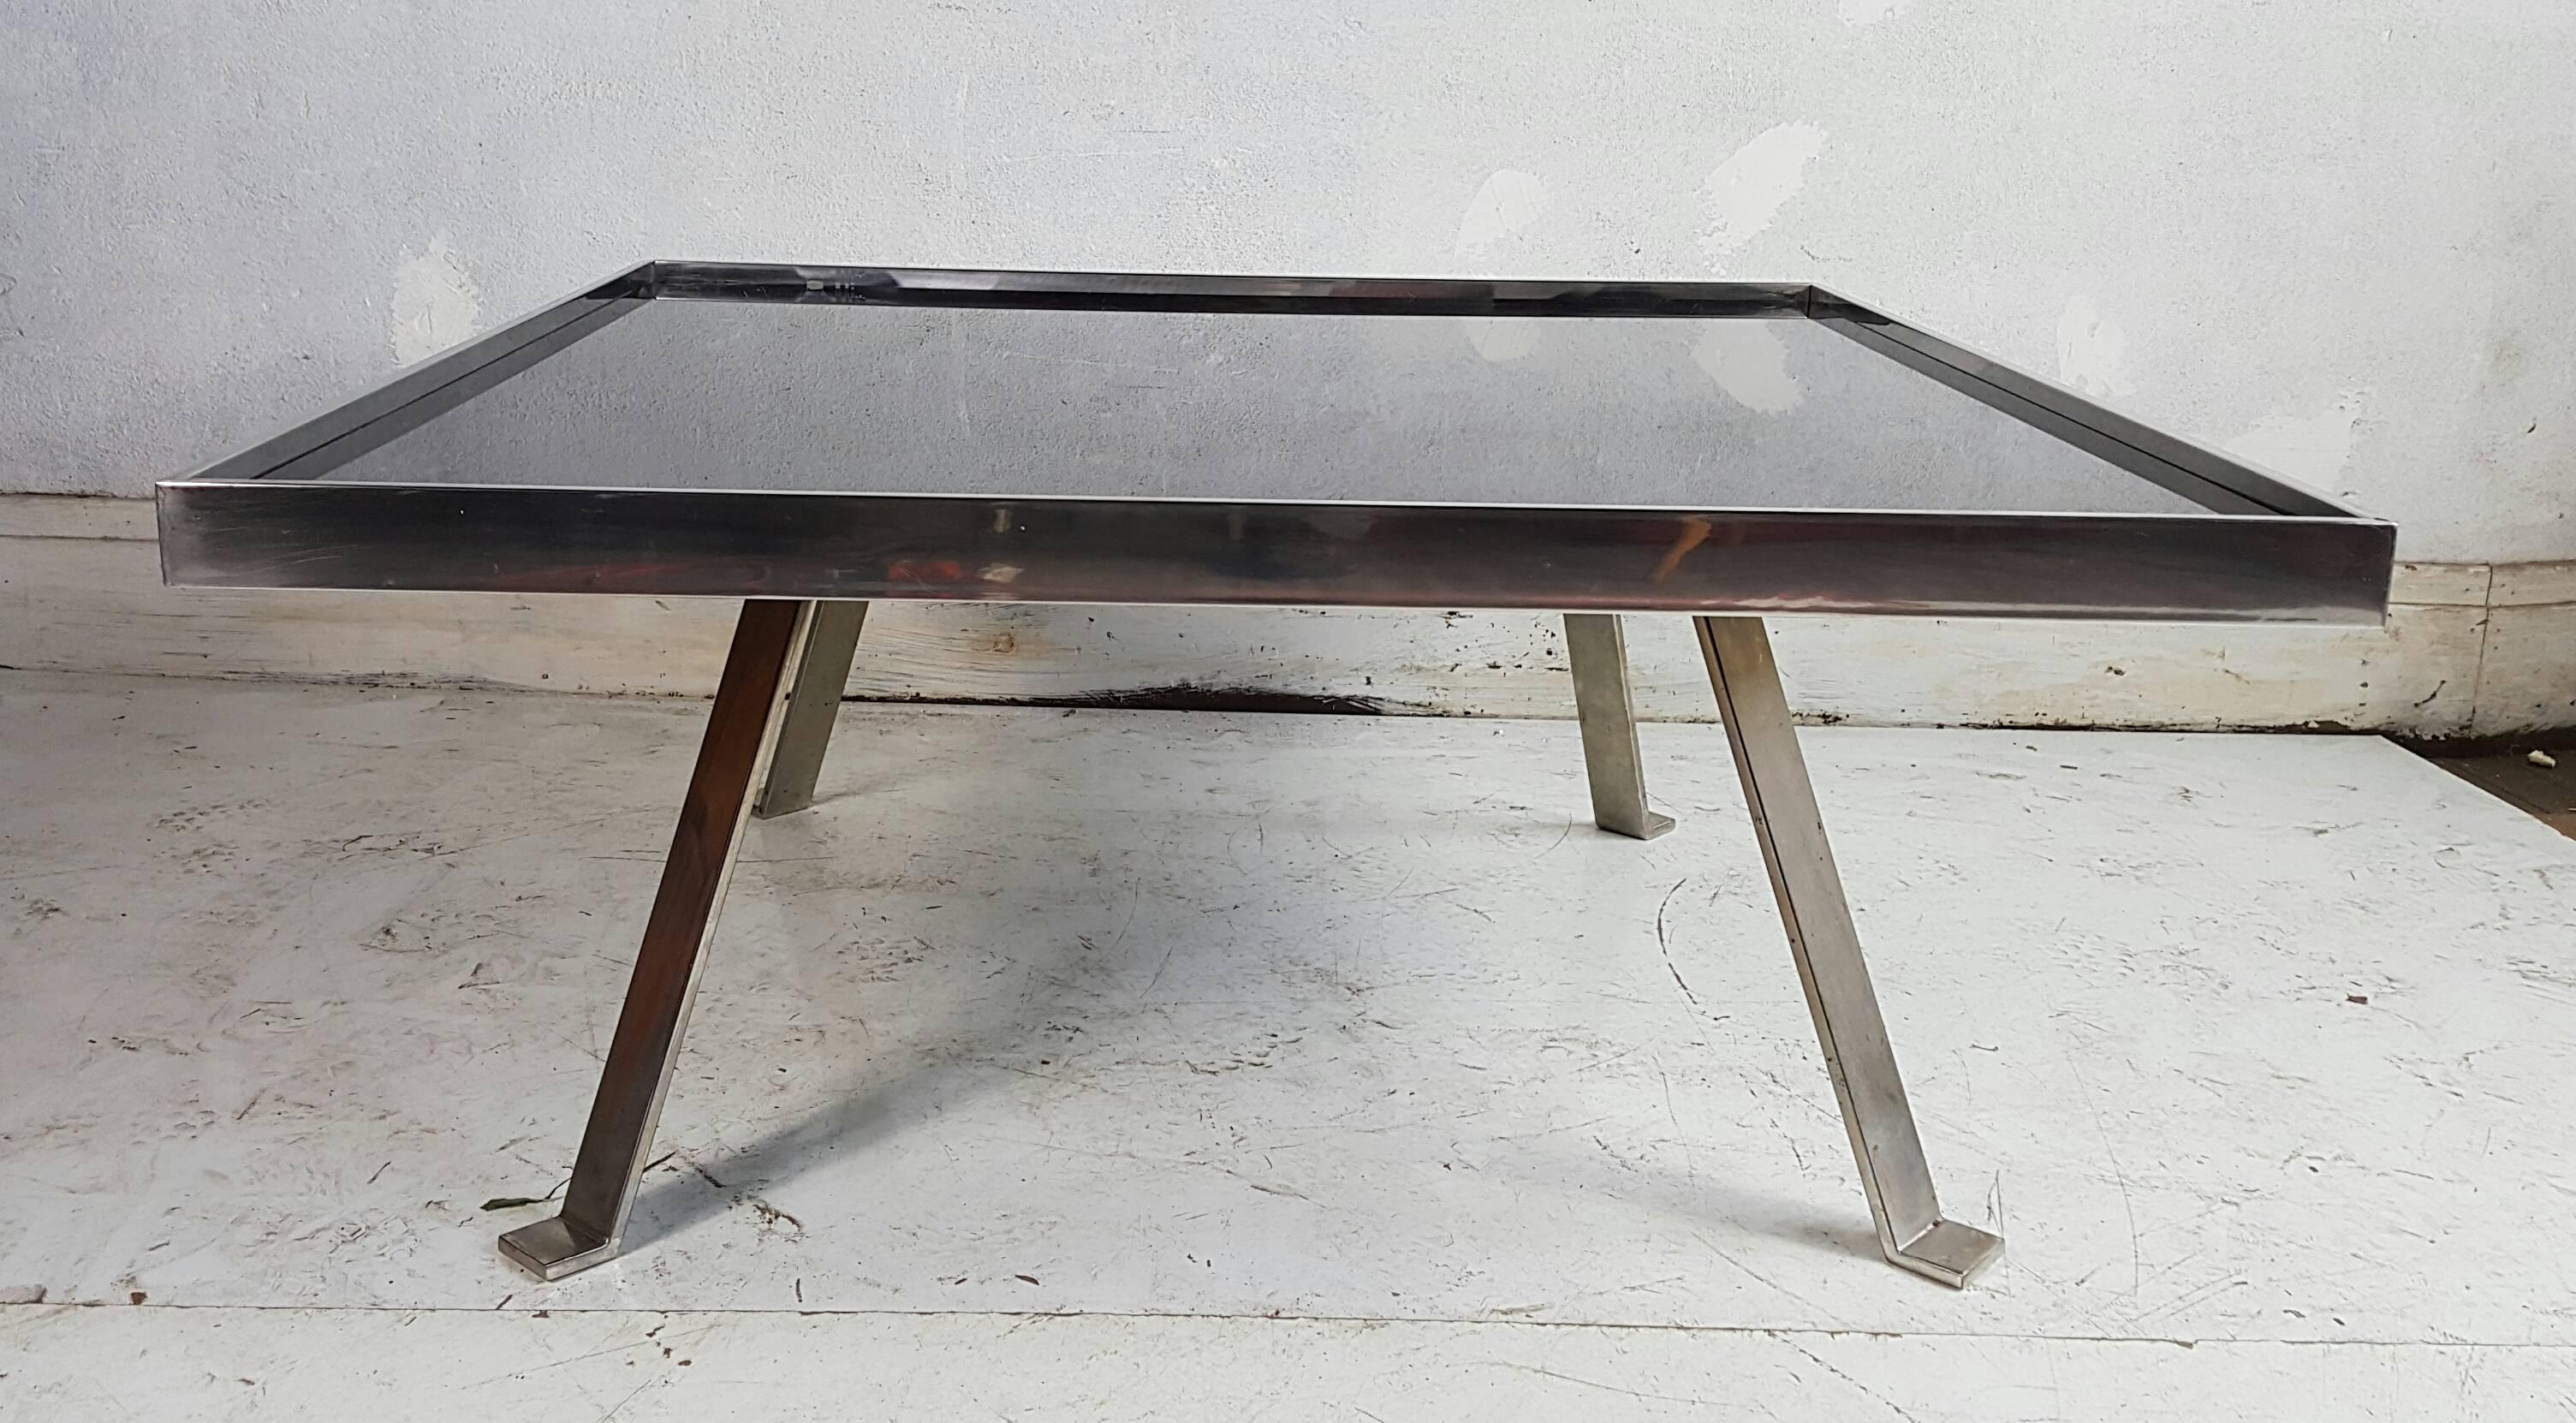 Italian Modernist Aluminium and Black Glass (Vitrolite) Cocktail Table In Good Condition For Sale In Buffalo, NY